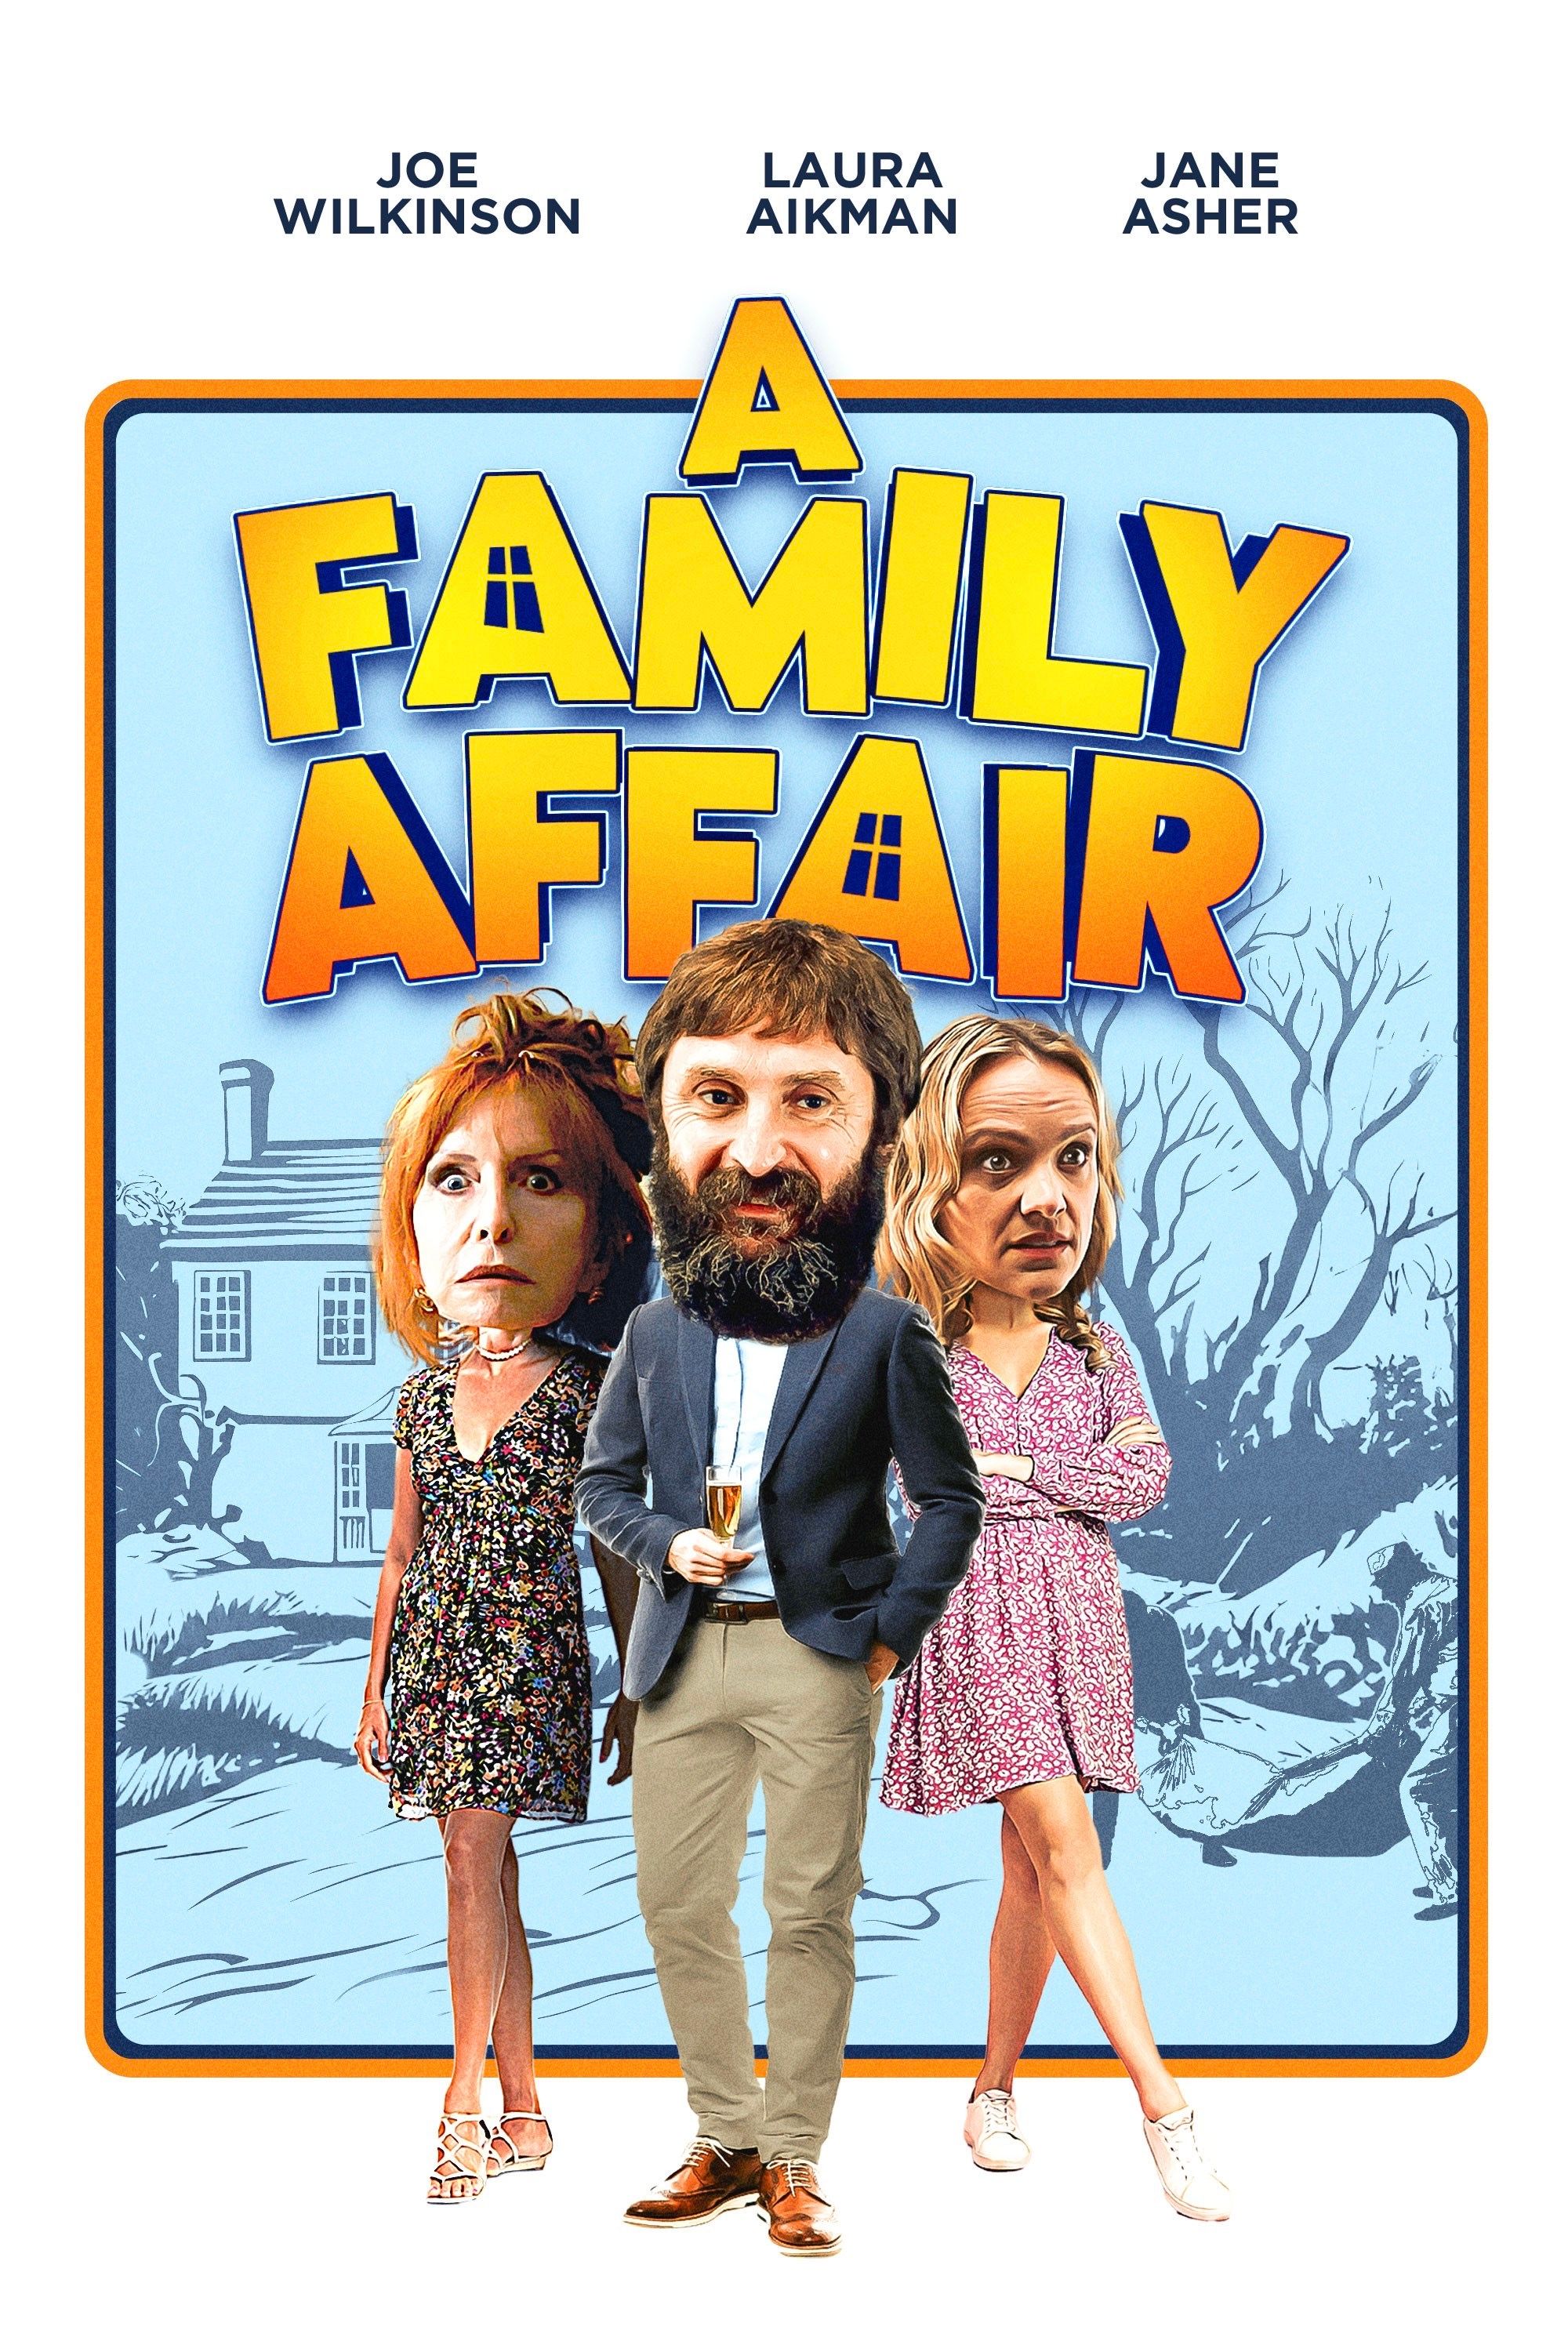 A Family Affair Movie Poster Showing Joe Wilkinson, Laura Aikman, and Jane Asher Standing in Front of a House with Enlarged Heads